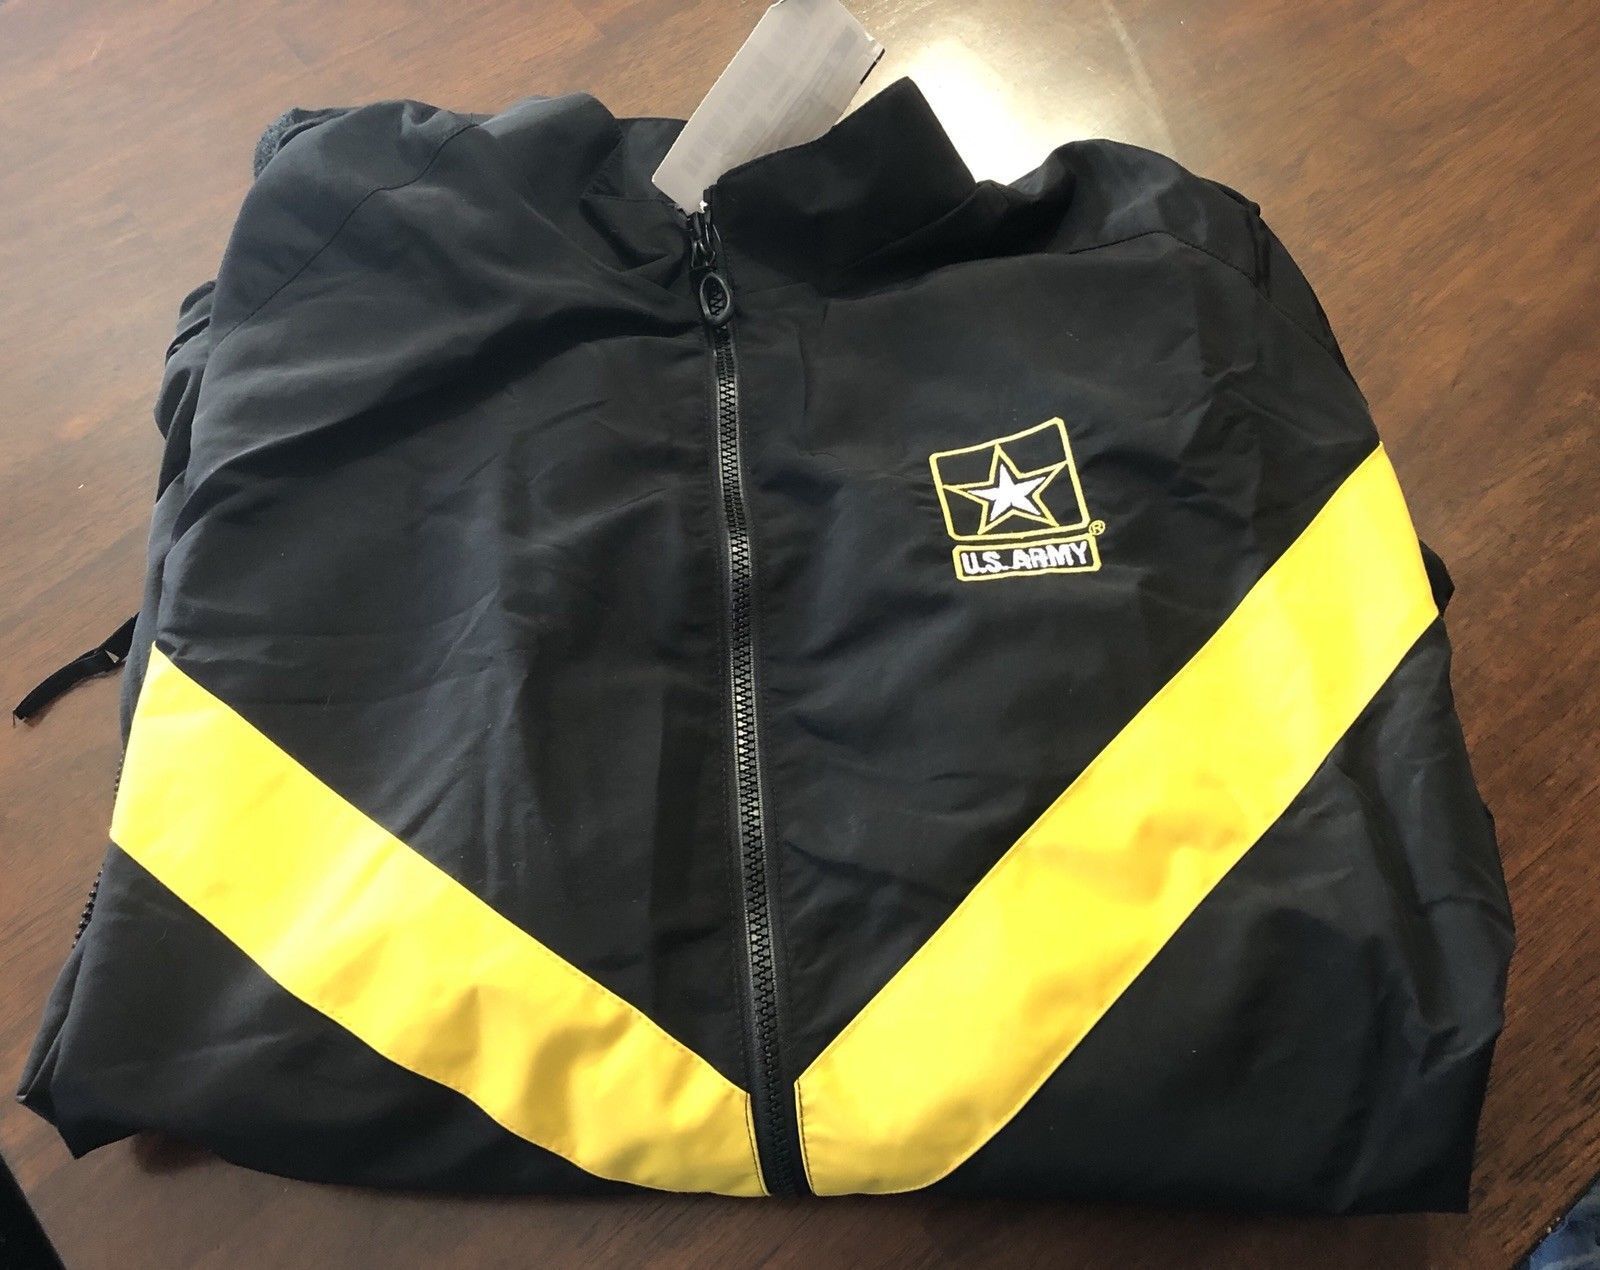 New US Army APFU  Army Physical Fitness  Jacket Black & Gold Female XSmall/Short